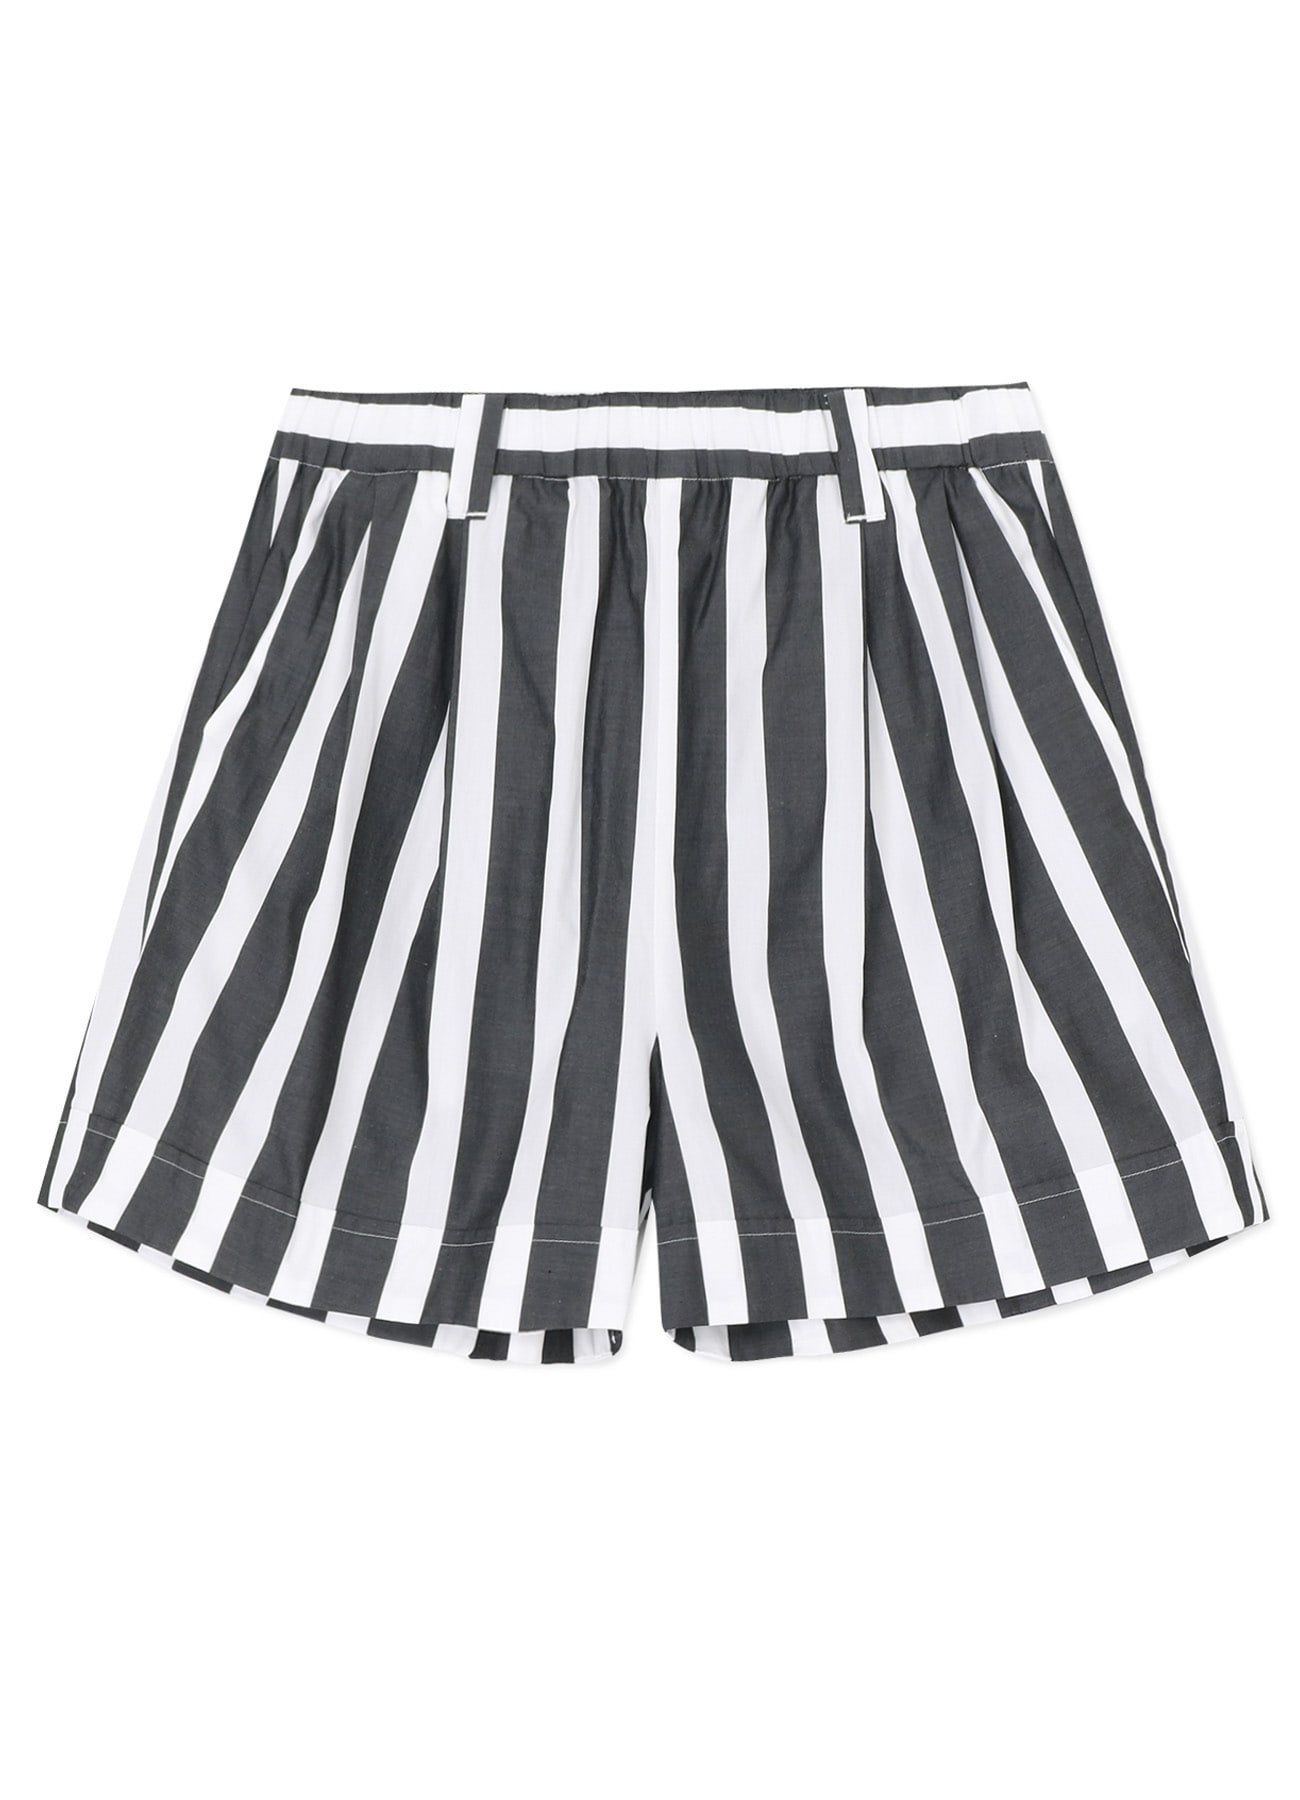 WIDE STRIPE SHORT PANTS(FREE SIZE White x Black): Y's for living 